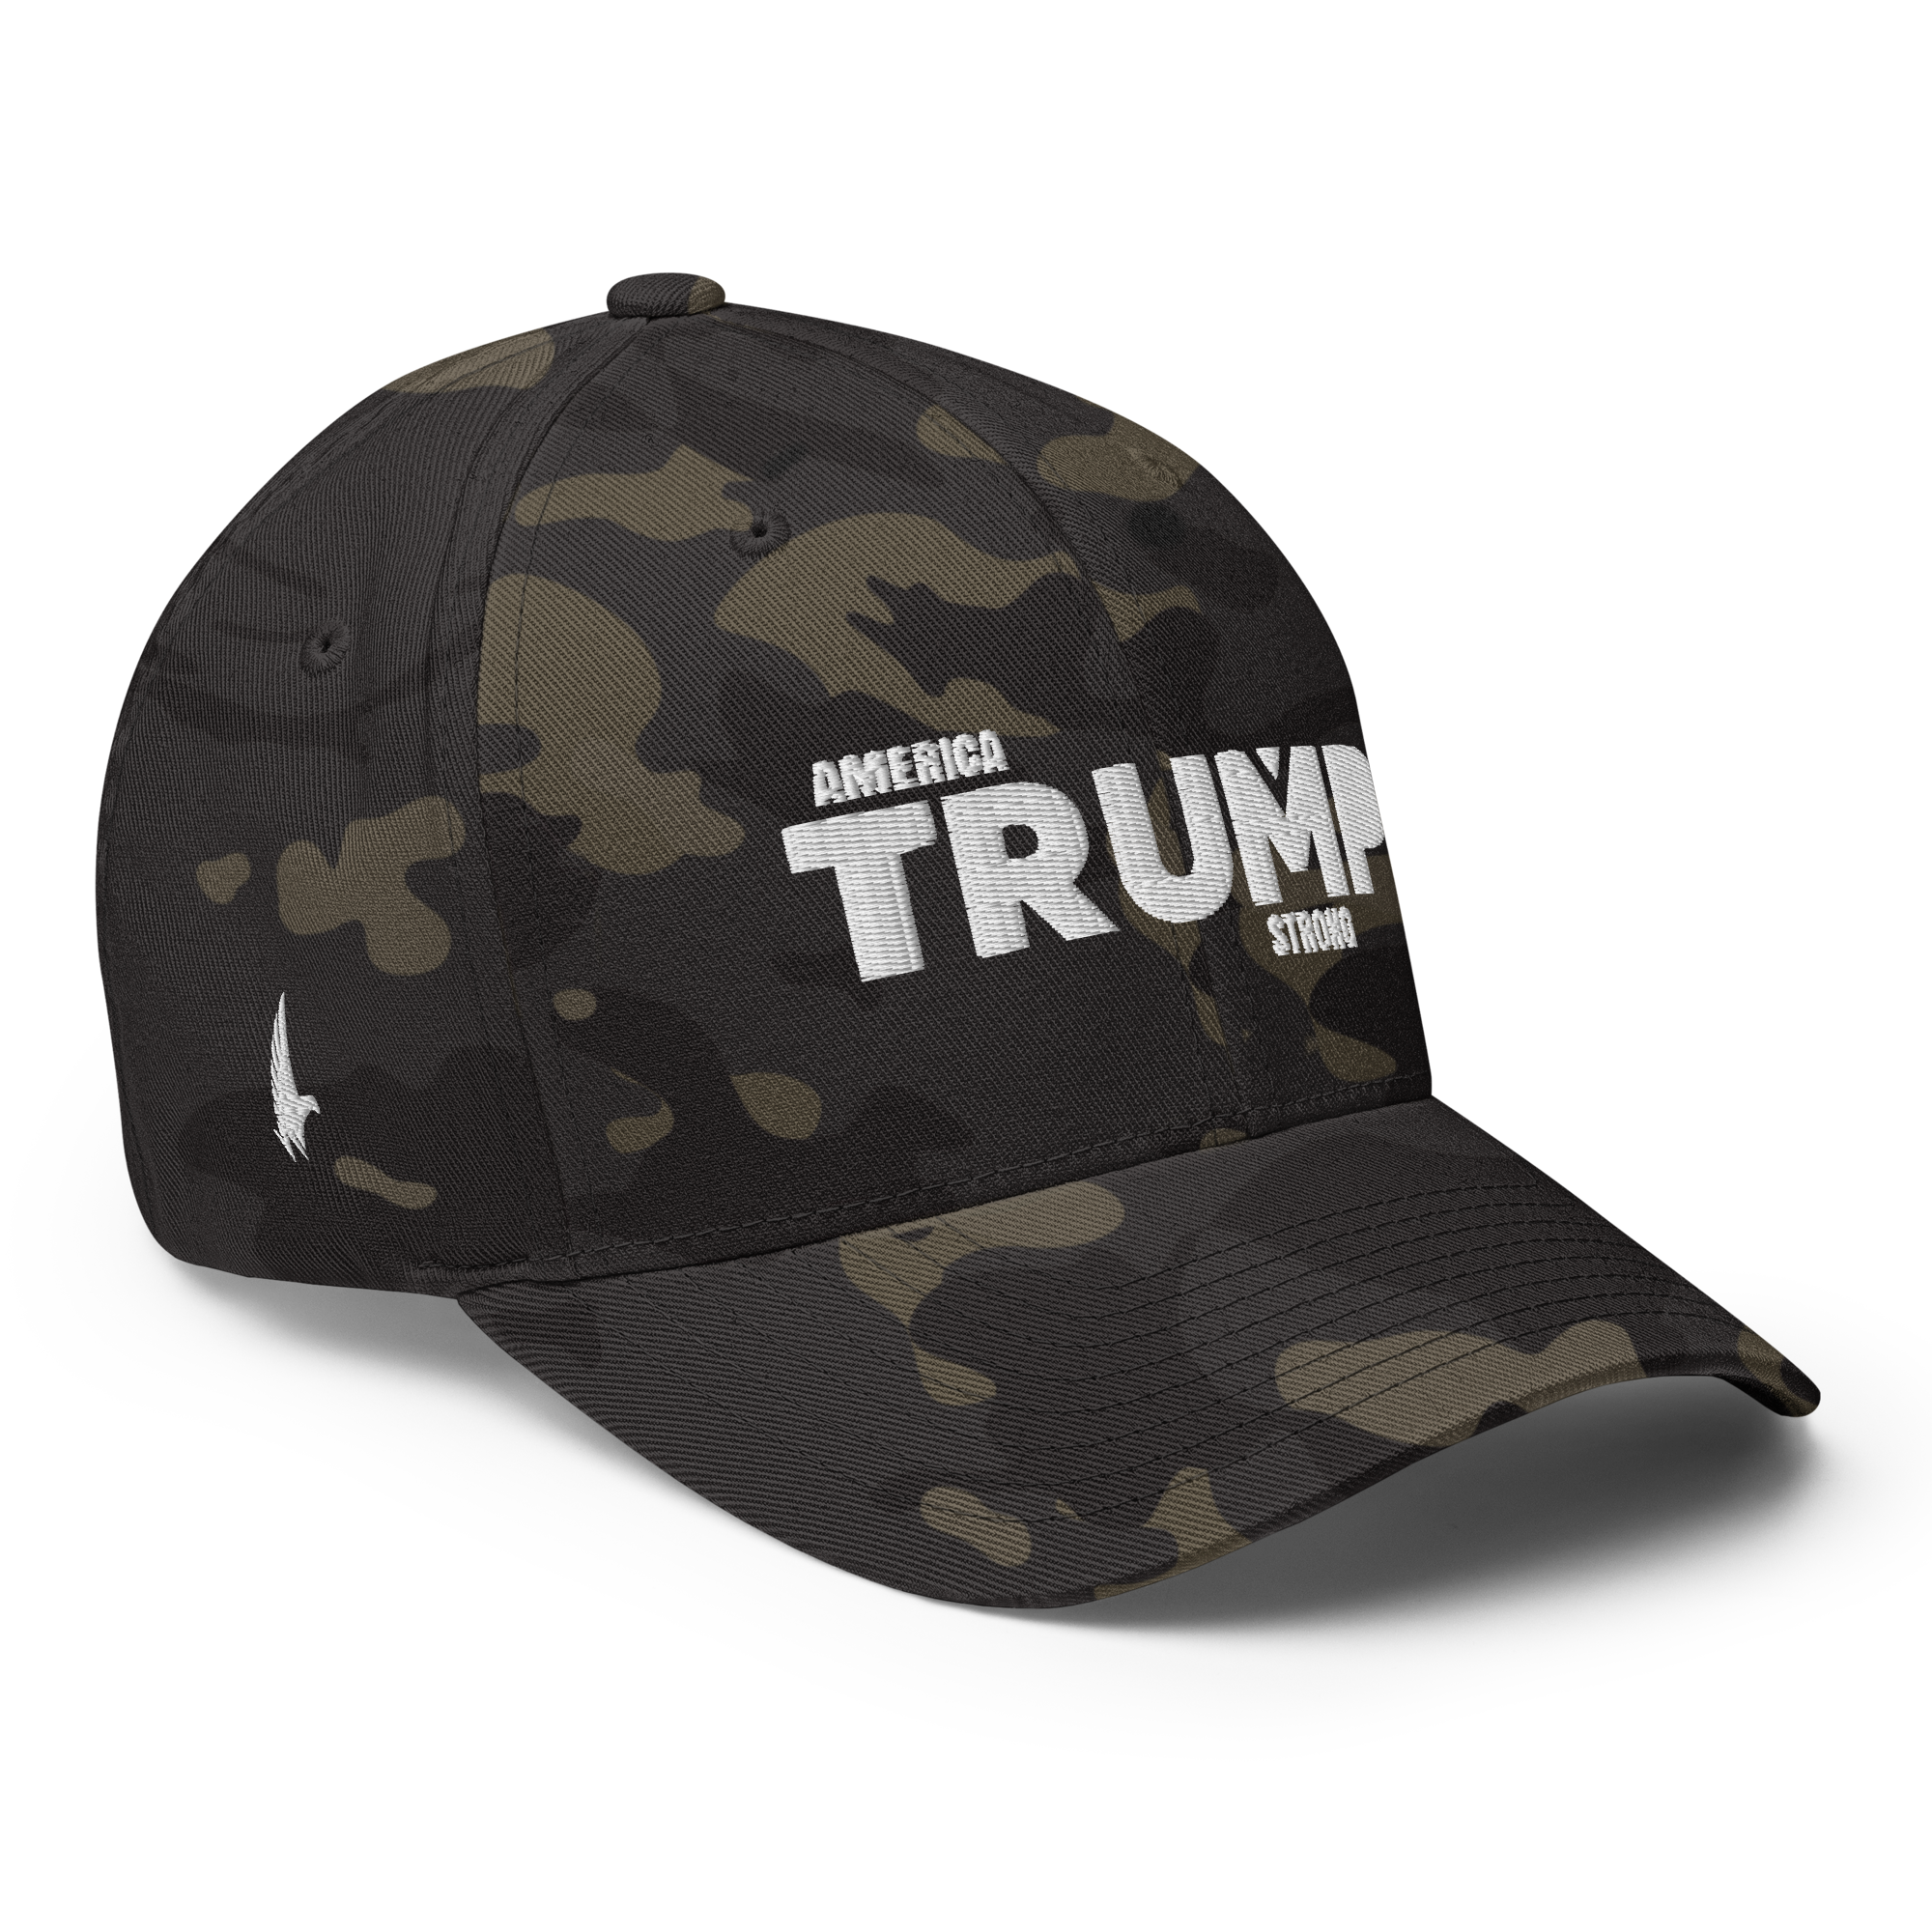 America Strong Trump Flexfit Hat Urban Camo Fitted - Loyalty Vibes